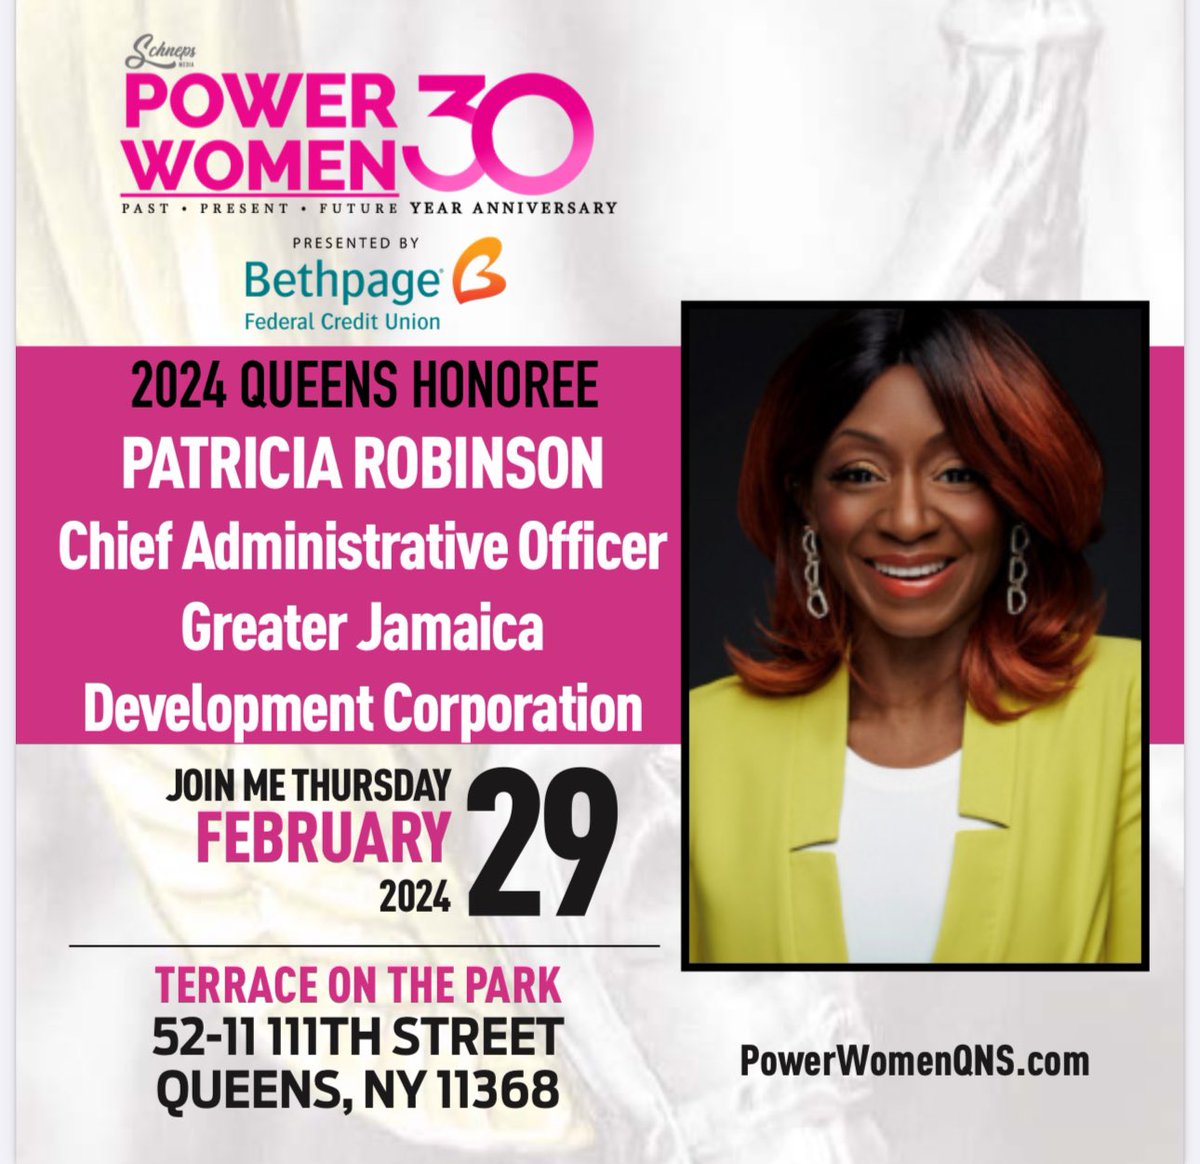 Thank you 🙏🏾. Honored to make the 2024 list for “Power Women of Queens” @schnepsmedia . As always I say “God is involved “ 💪🏾 Thanks to an incredible leadership @gjdcprez , For allowing all of my talents to breathe, grow and serve .